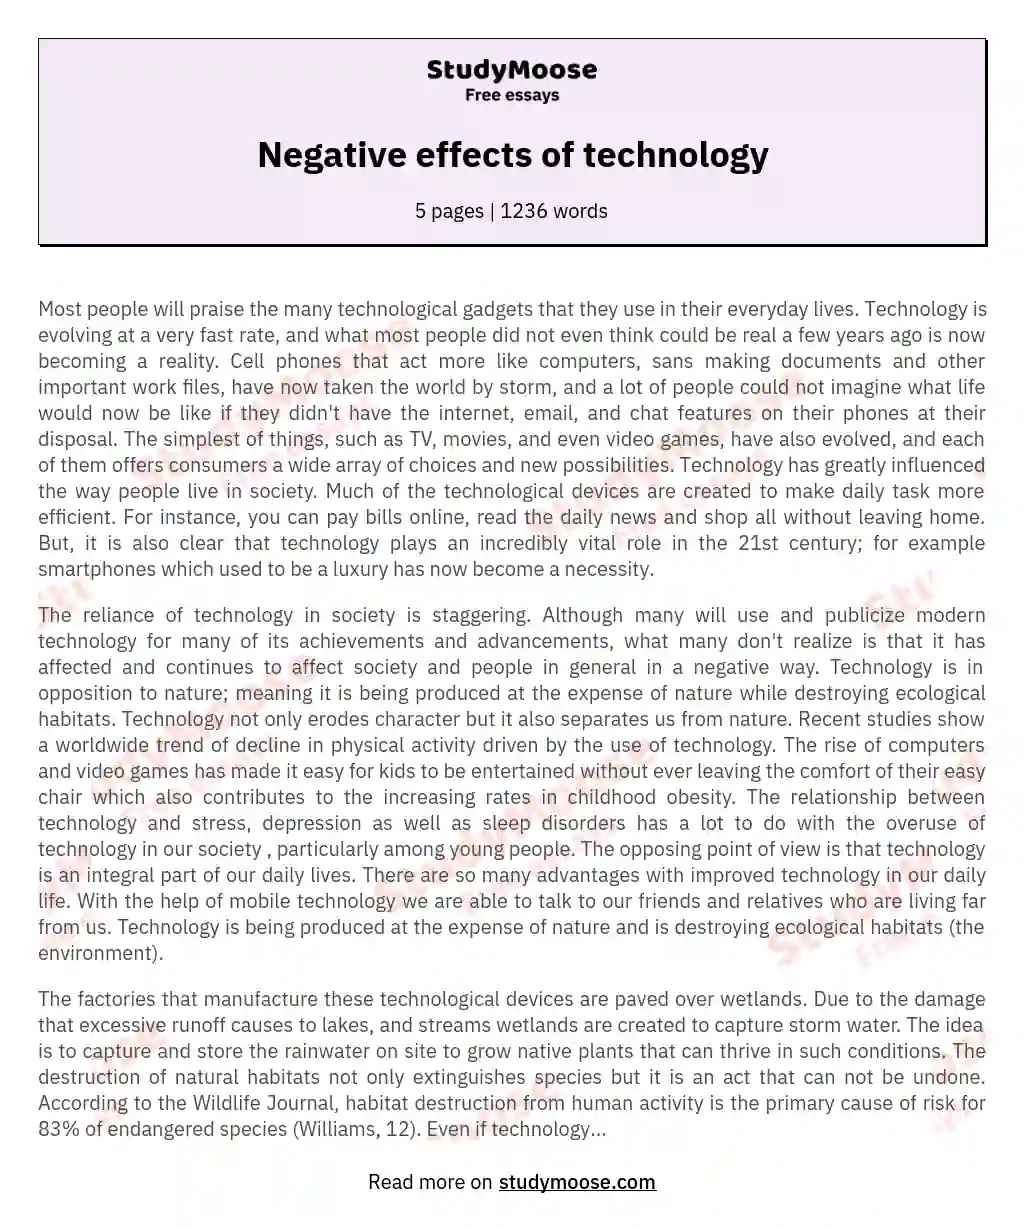 Negative effects of technology essay